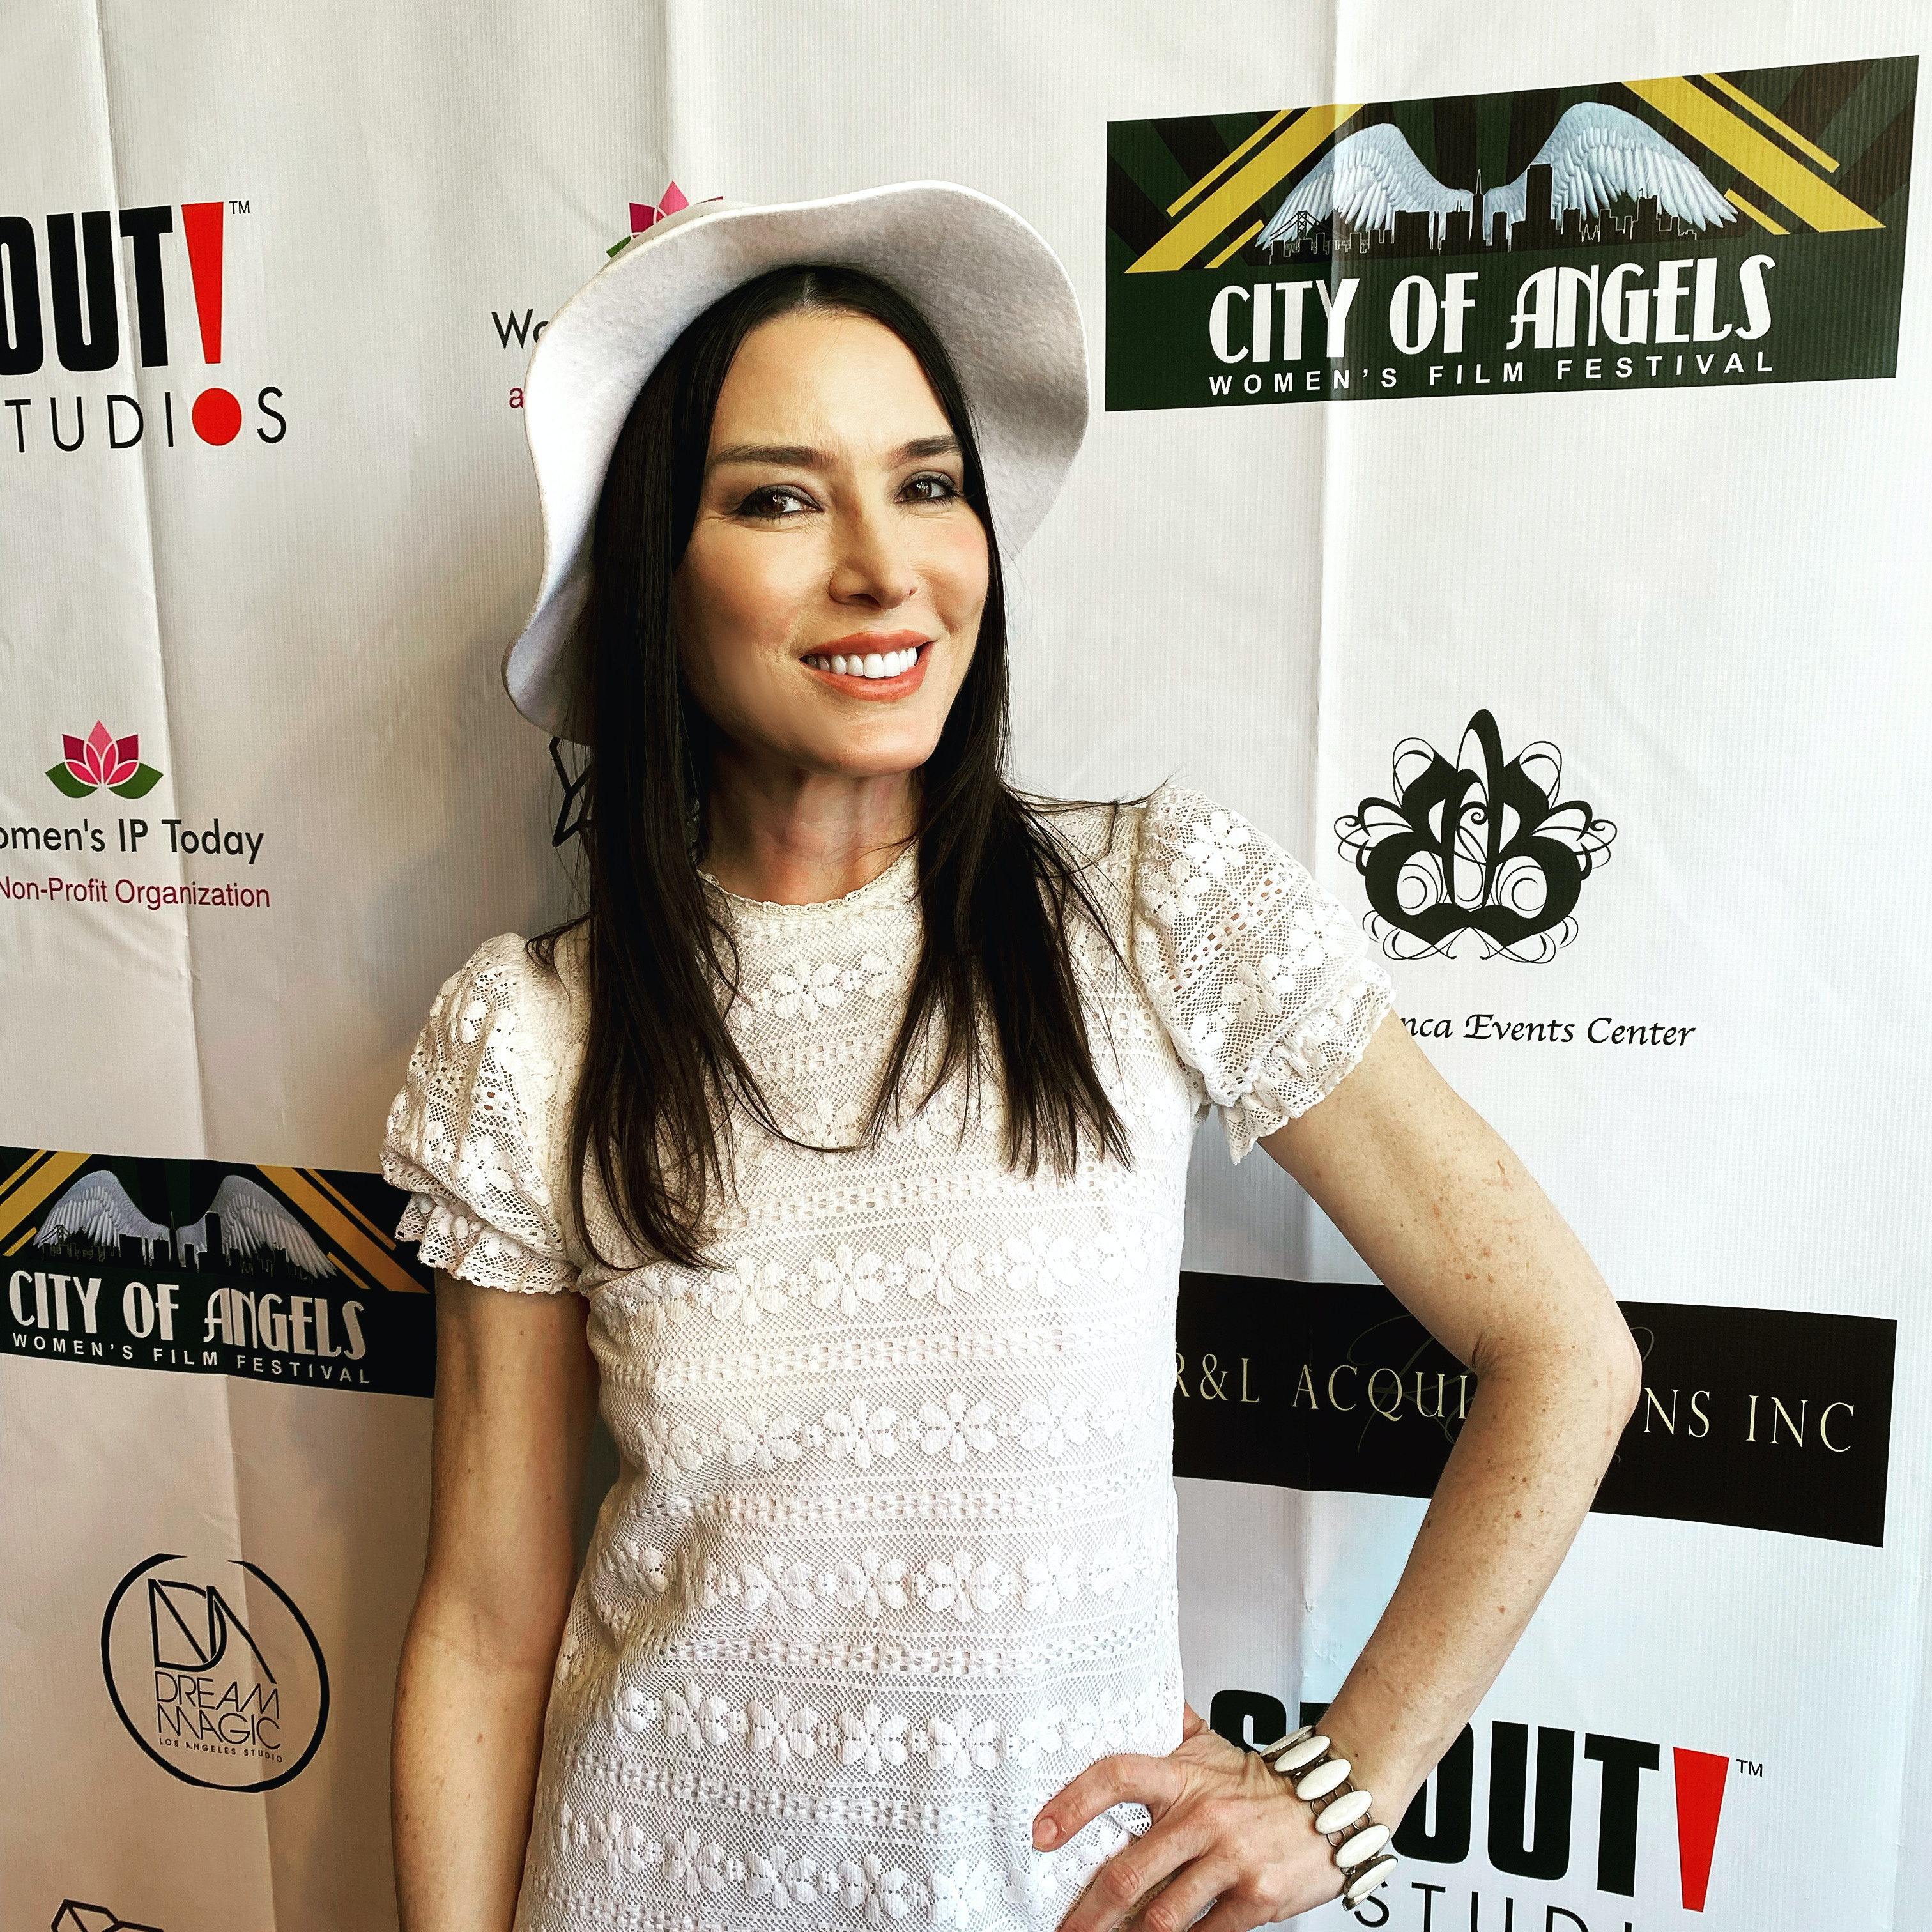 In Conversation With City Of Angels Women's Film Festival Founder Lisa K. Crosato